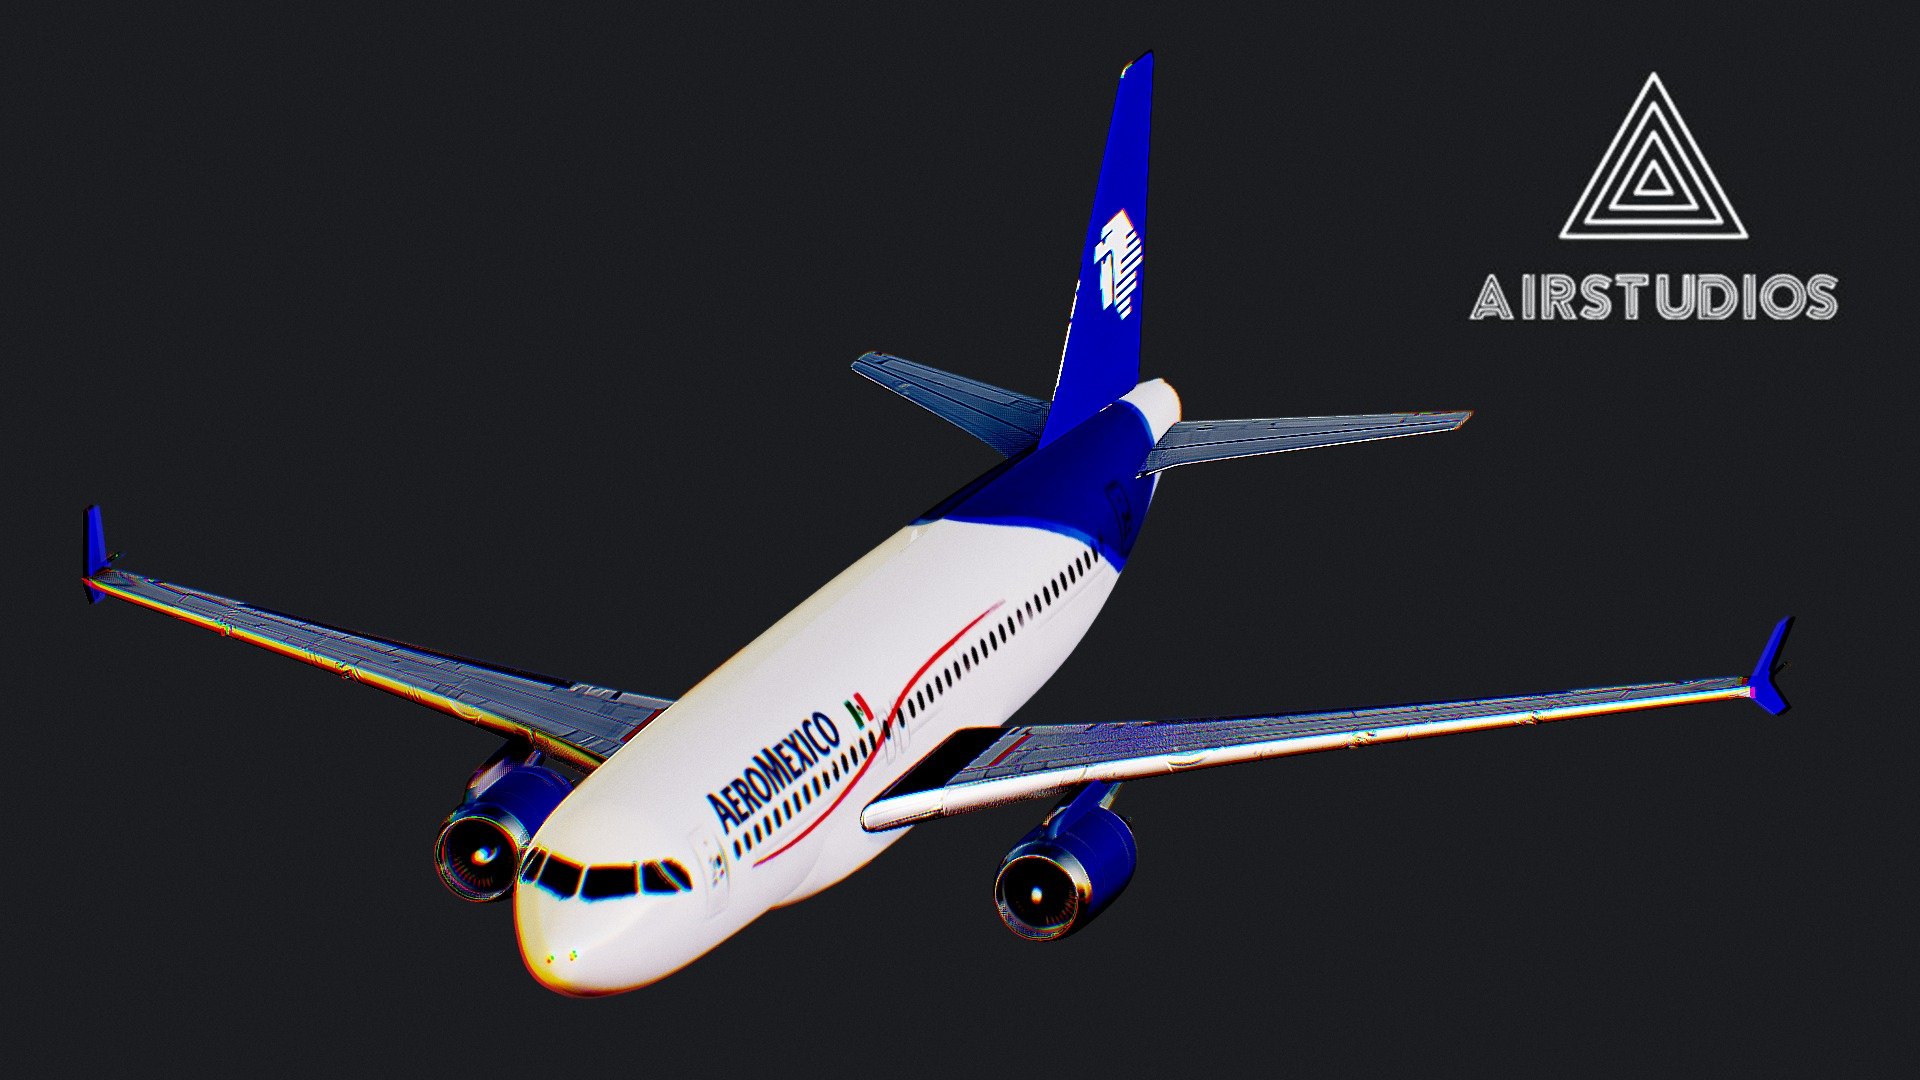 Airbus A320 (AeroMexico) Airplane

Made in Blender - Airbus A320 (AeroMexico) Airplane - Buy Royalty Free 3D model by AirStudios (@sebbe613) 3d model